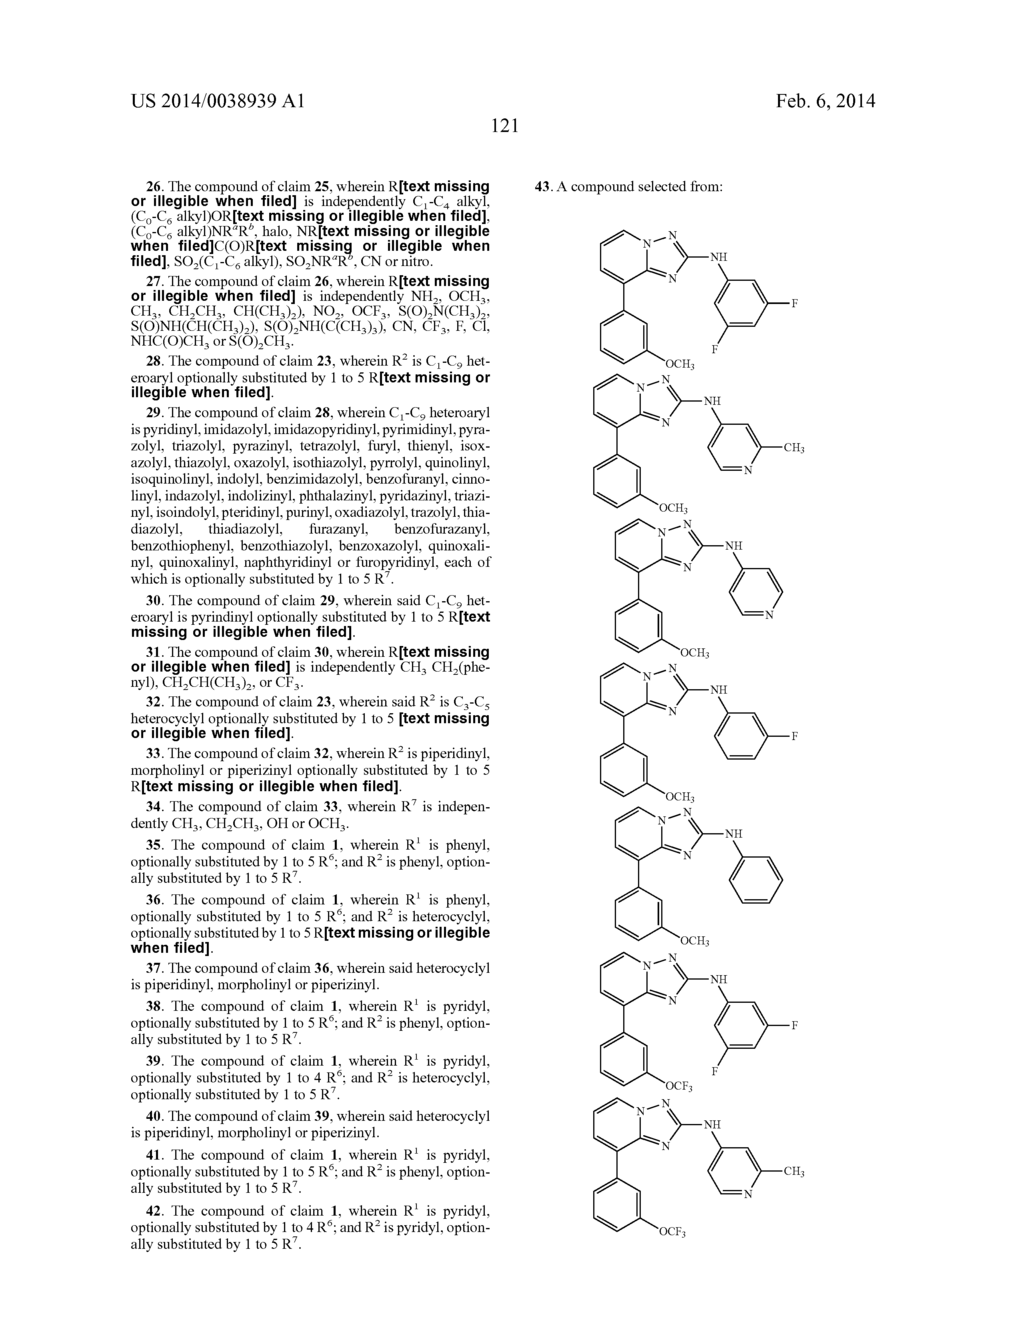 TRIAZOLOPYRIDINE JAK INHIBITOR COMPOUNDS AND METHODS - diagram, schematic, and image 122